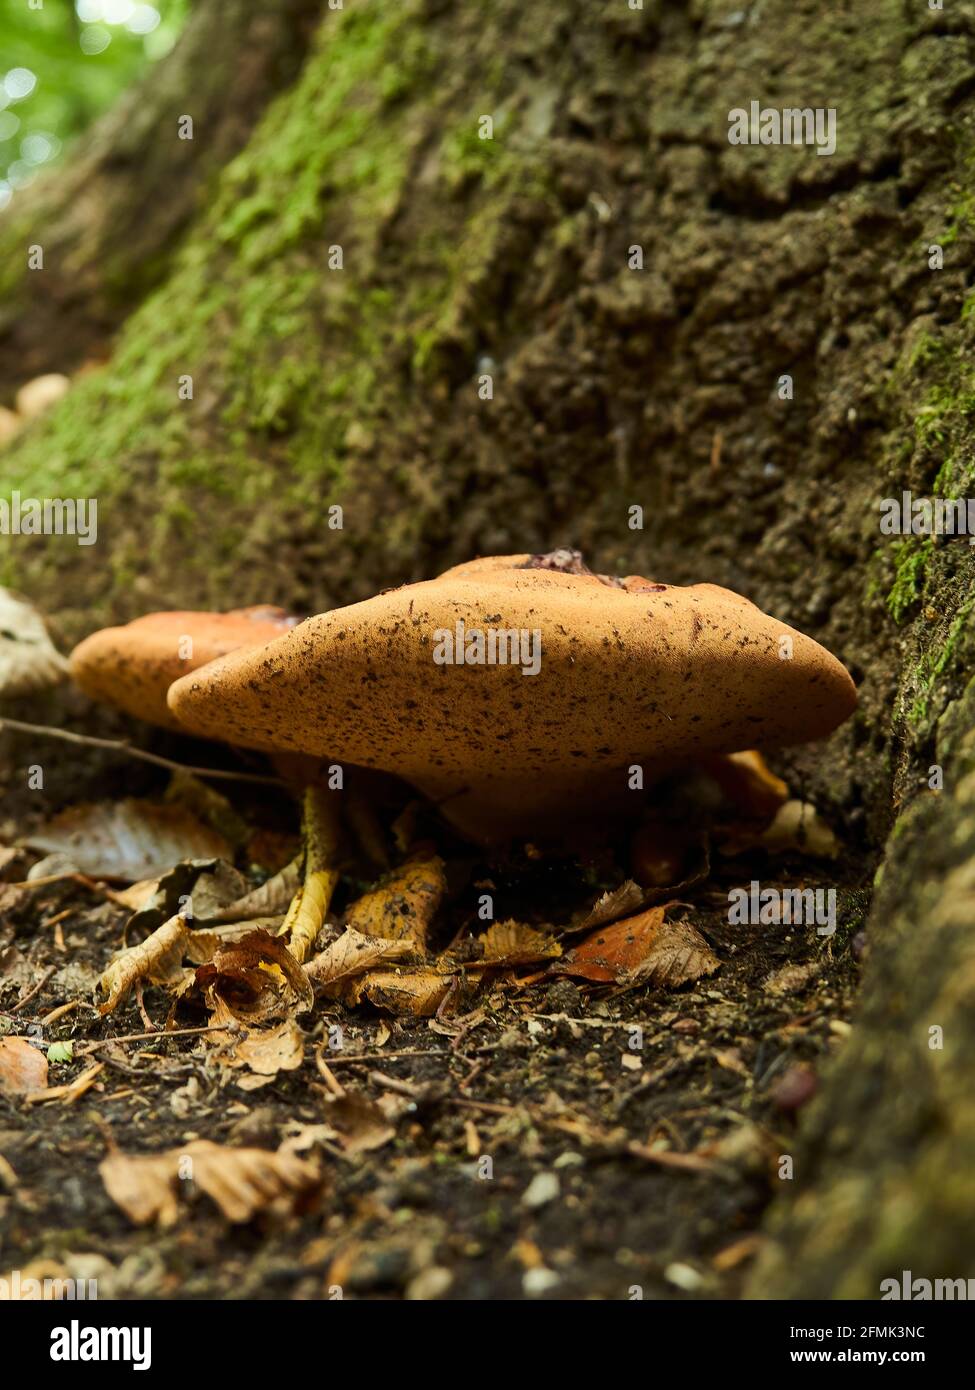 A Beef Steak Fungus attached to the base of a moss-covered tree, in a patch of urban woodland strewn with autumnal leaf litter. Stock Photo